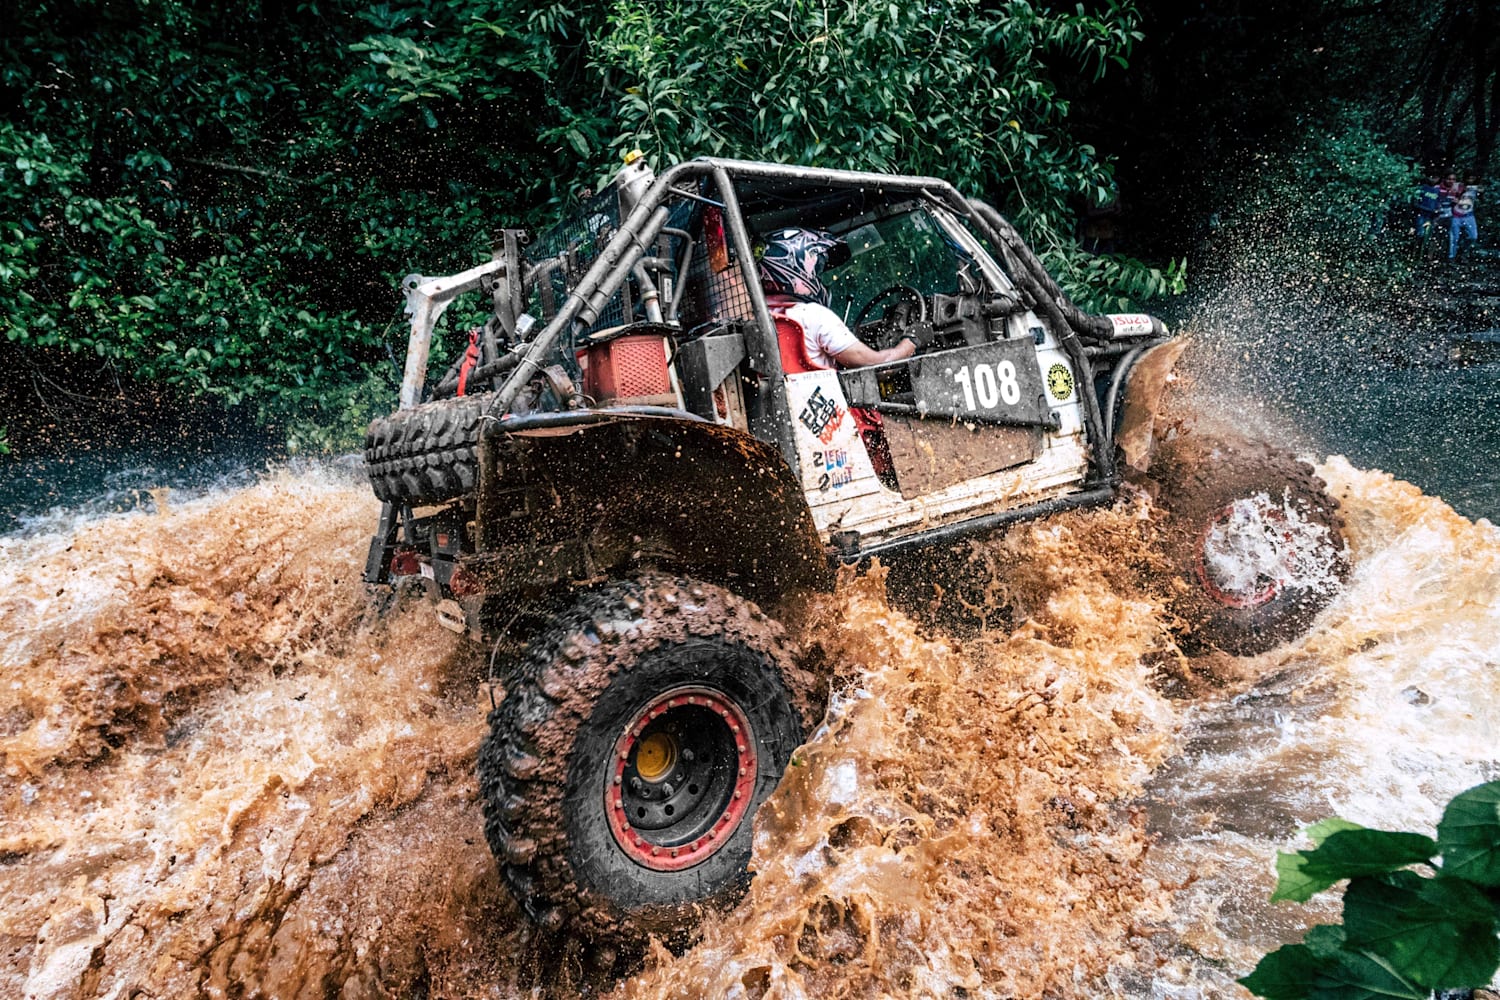 Rainforest Challenge 2018, 4x4 vehicle off-road rally.